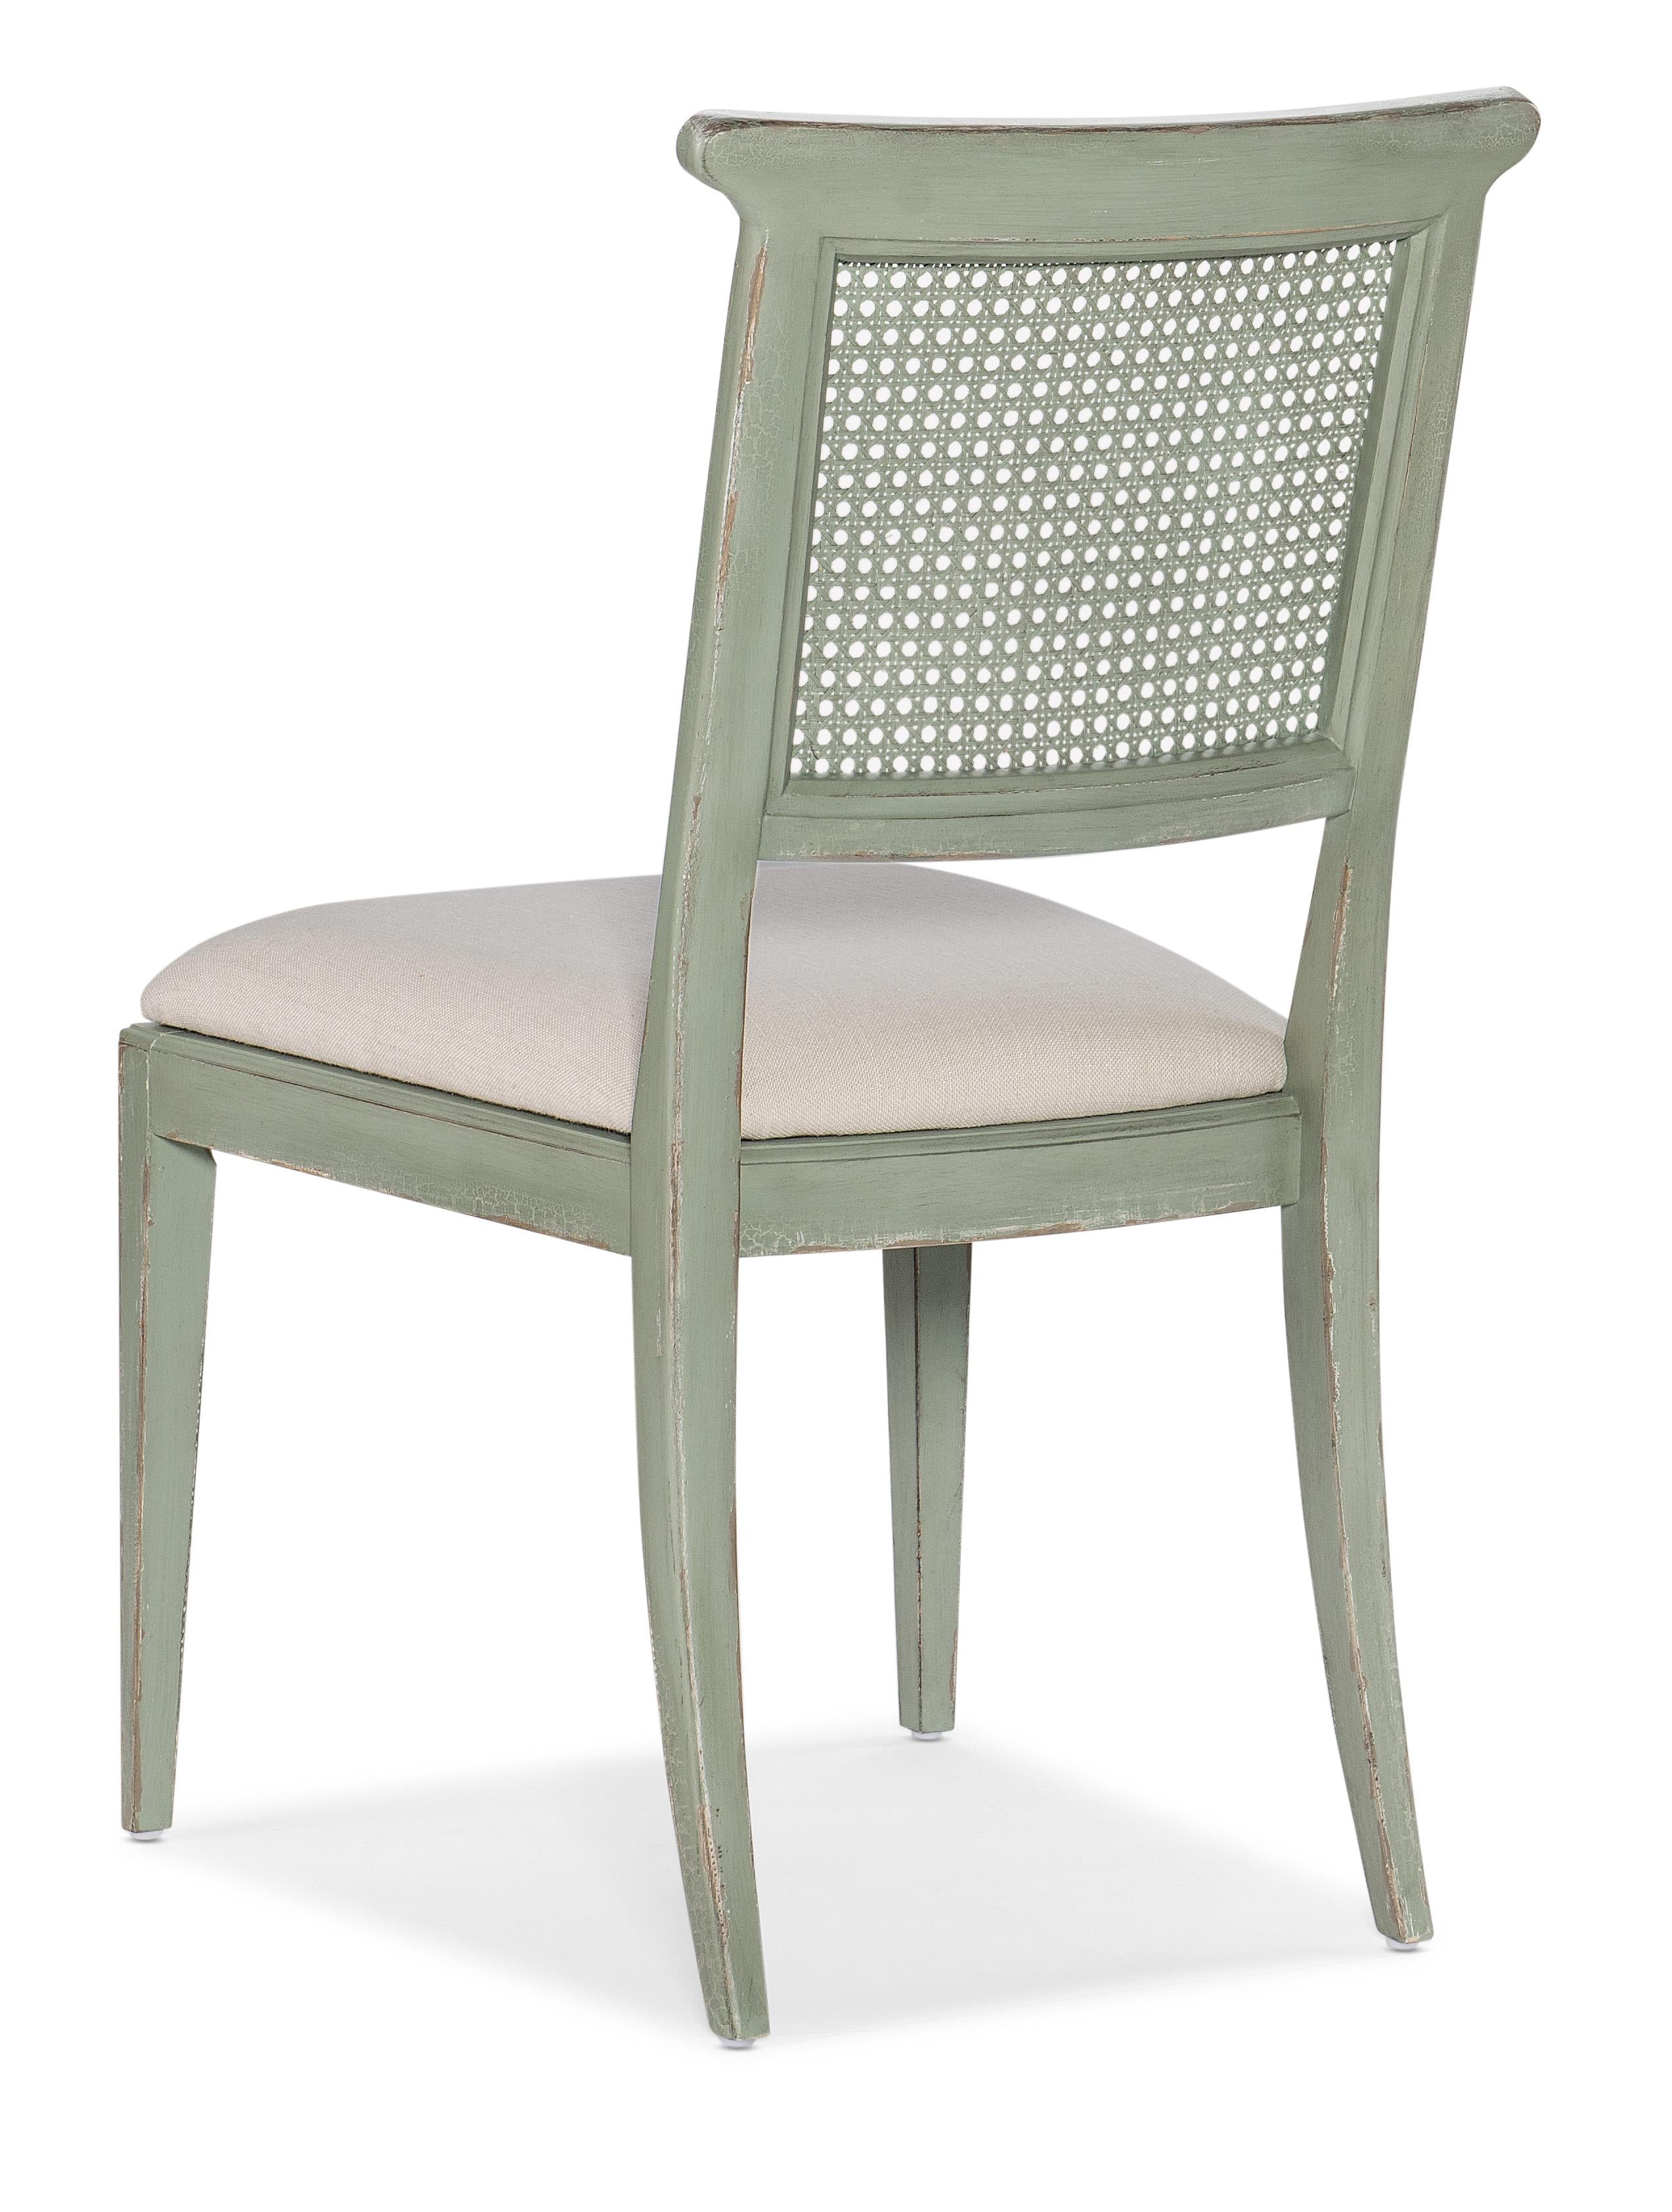 Charleston Upholstered Seat Side Chair-2 per carton/price ea - 6750-75410-32